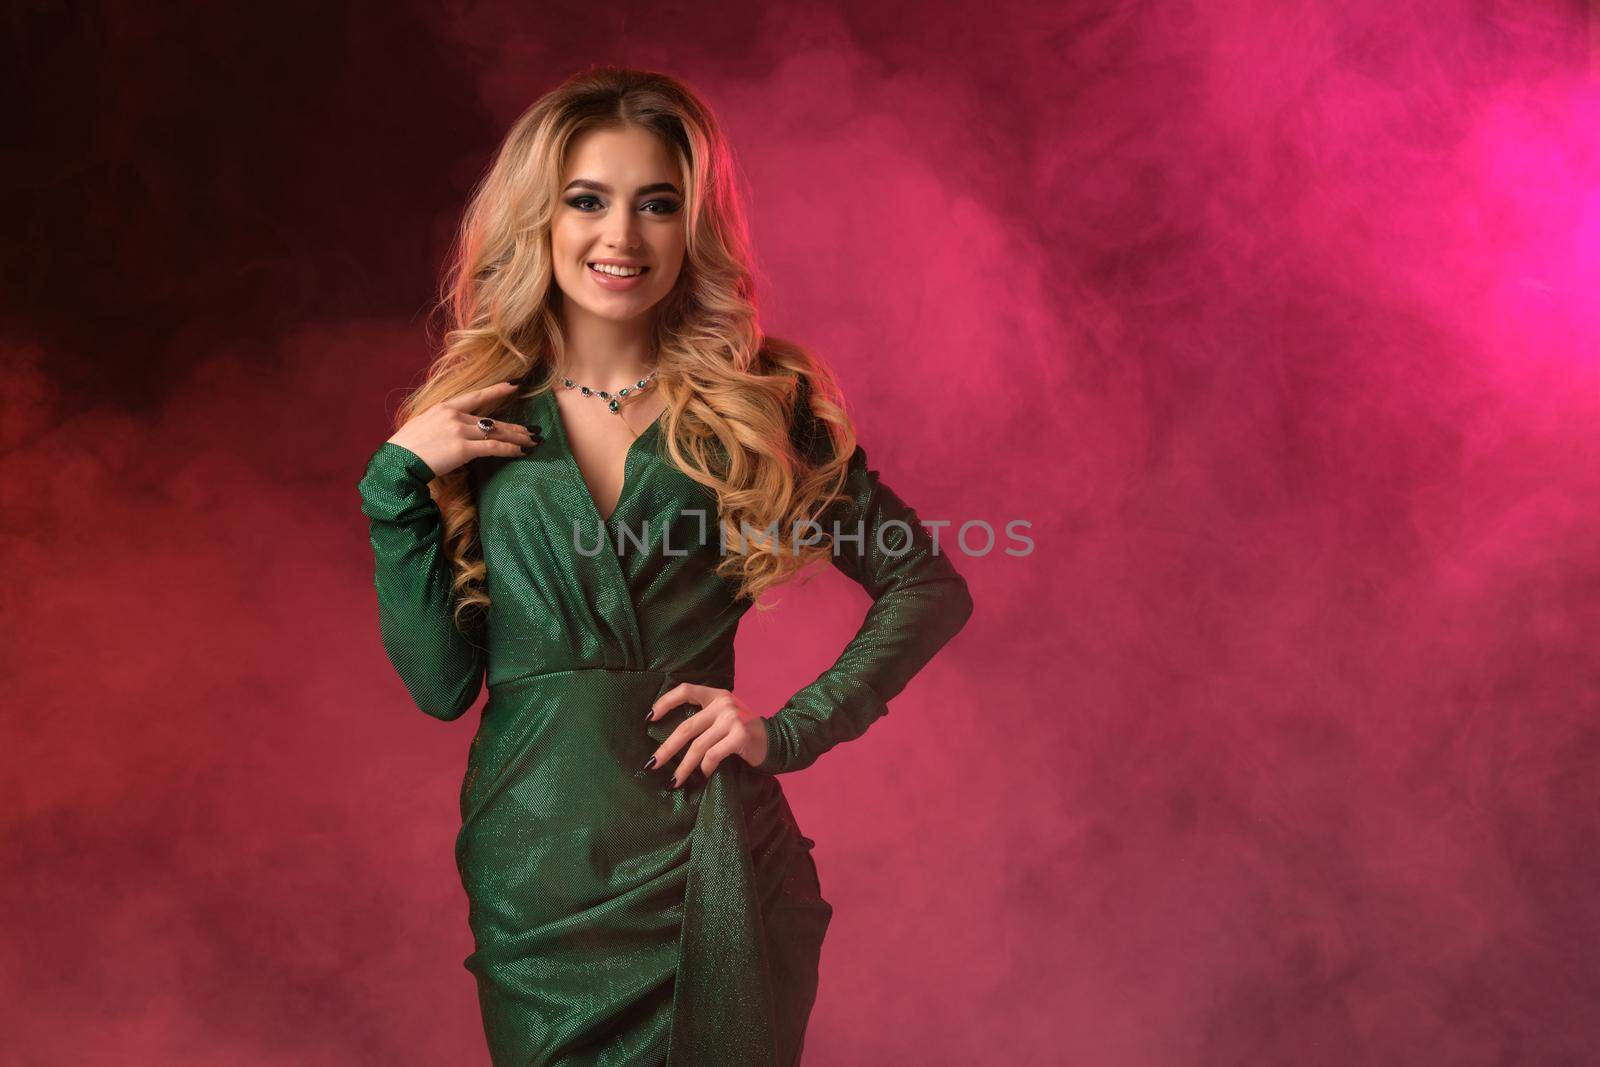 Attractive, blonde curly female in green stylish dress and jewelry. She put her hand on waist, smiling, looking at you, posing against colorful smoky studio background. Fashion and beauty. Close up